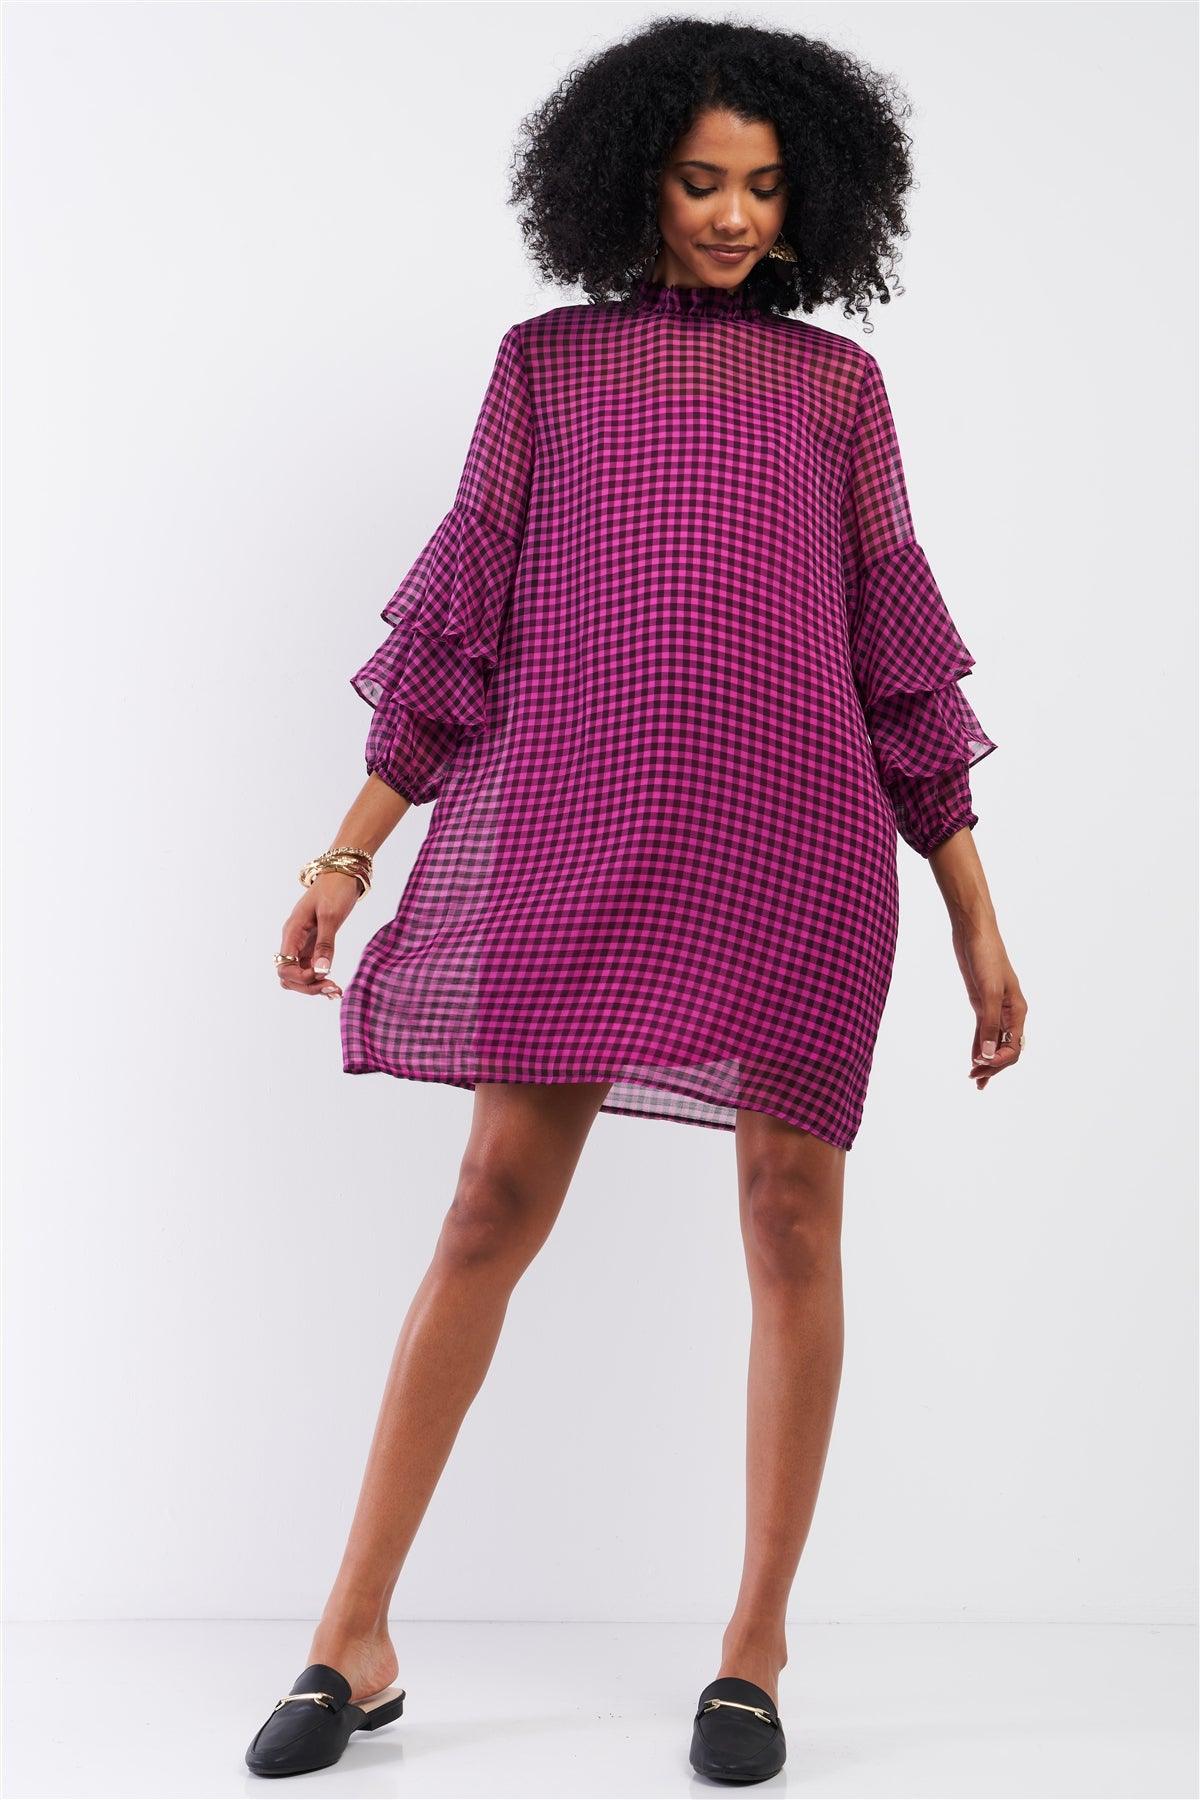 Black & Pink Checkered Print Relaxed Frill Mock Neck Layered Flare Sleeve Detail Mini Dress /1-2-3